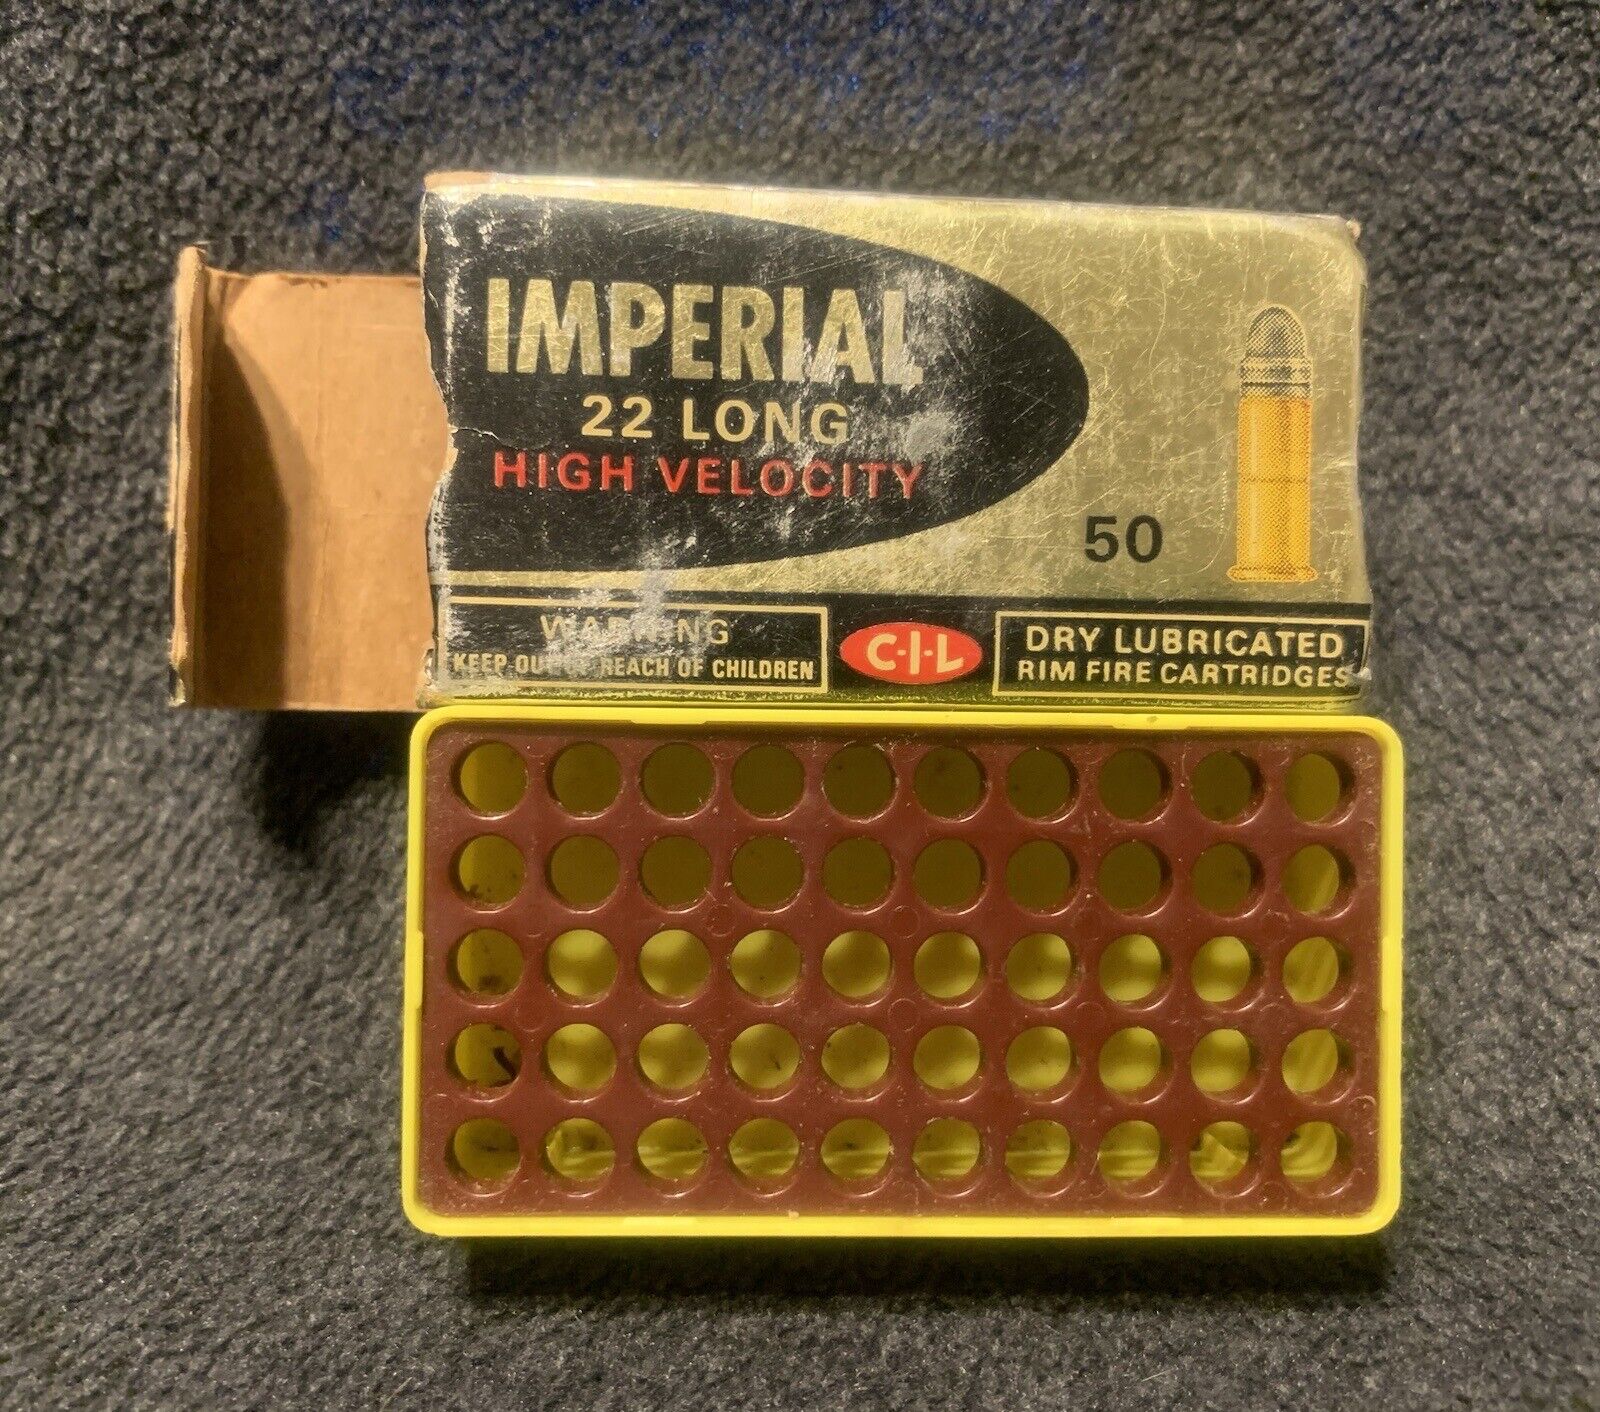 CIL Imperial Hollow Point 22 Long Rifle Shell Empty Box, 1 plastic shell holder